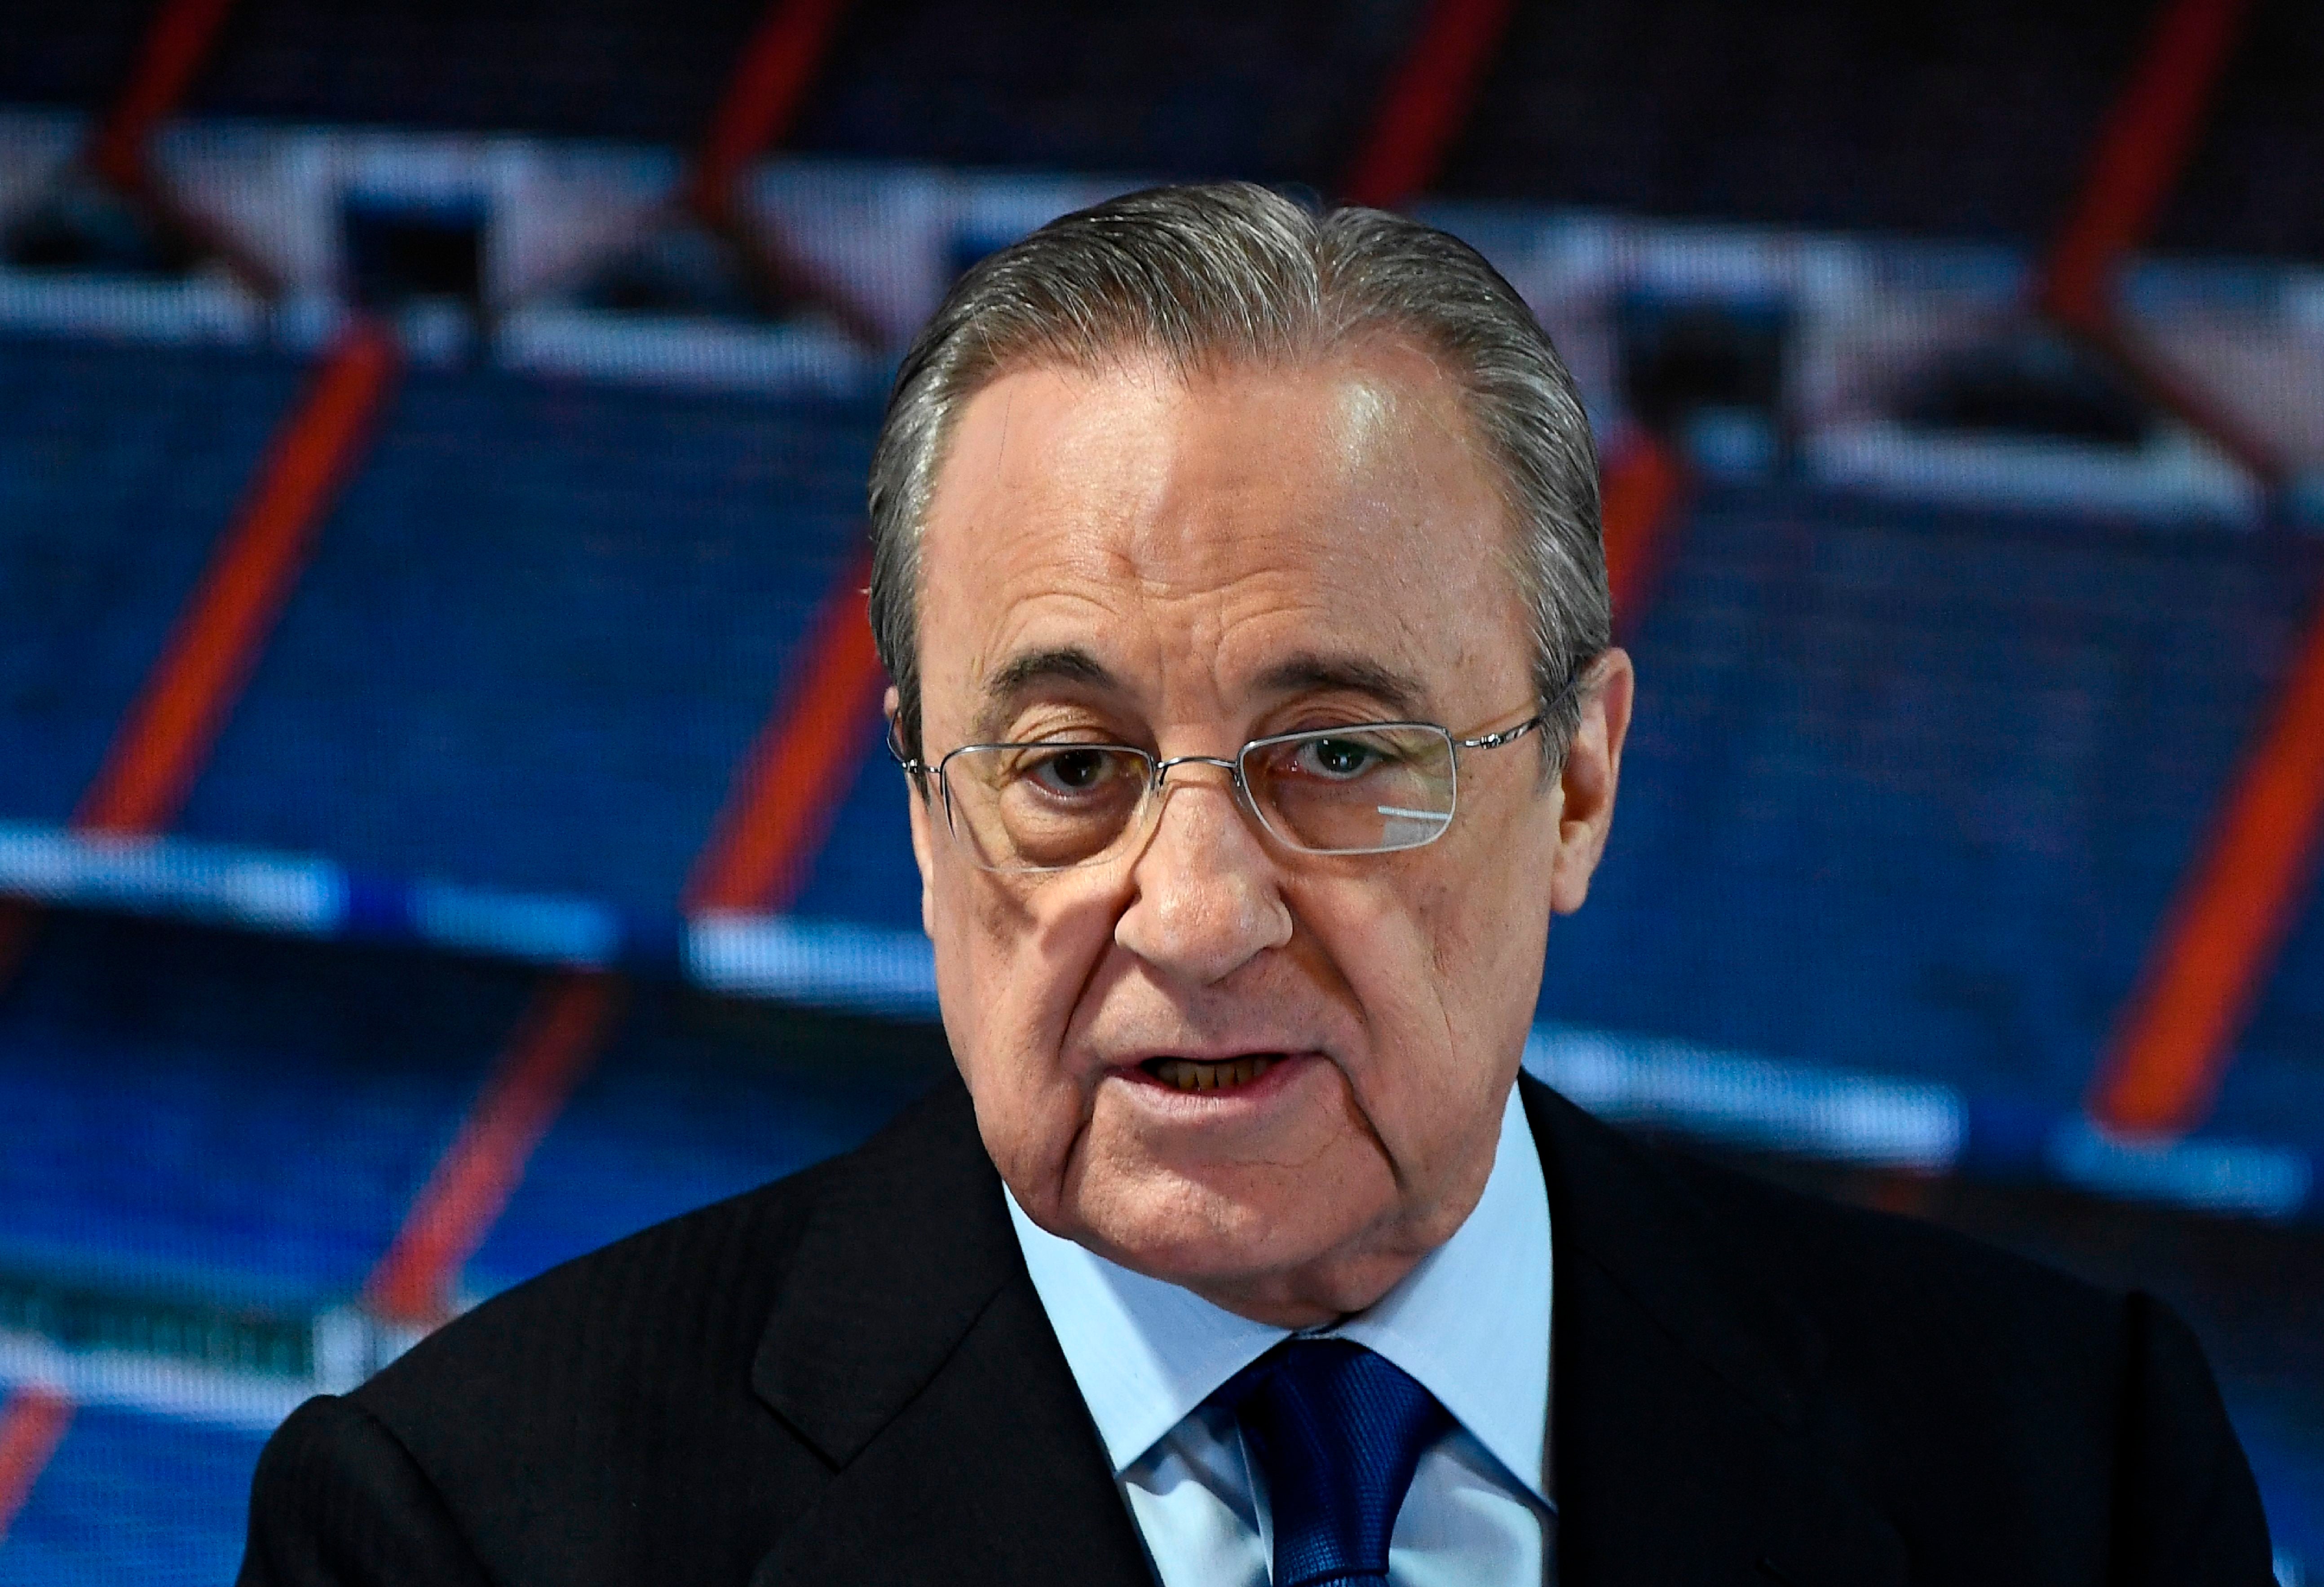 Florentino Perez was appointed chairman of the Super League